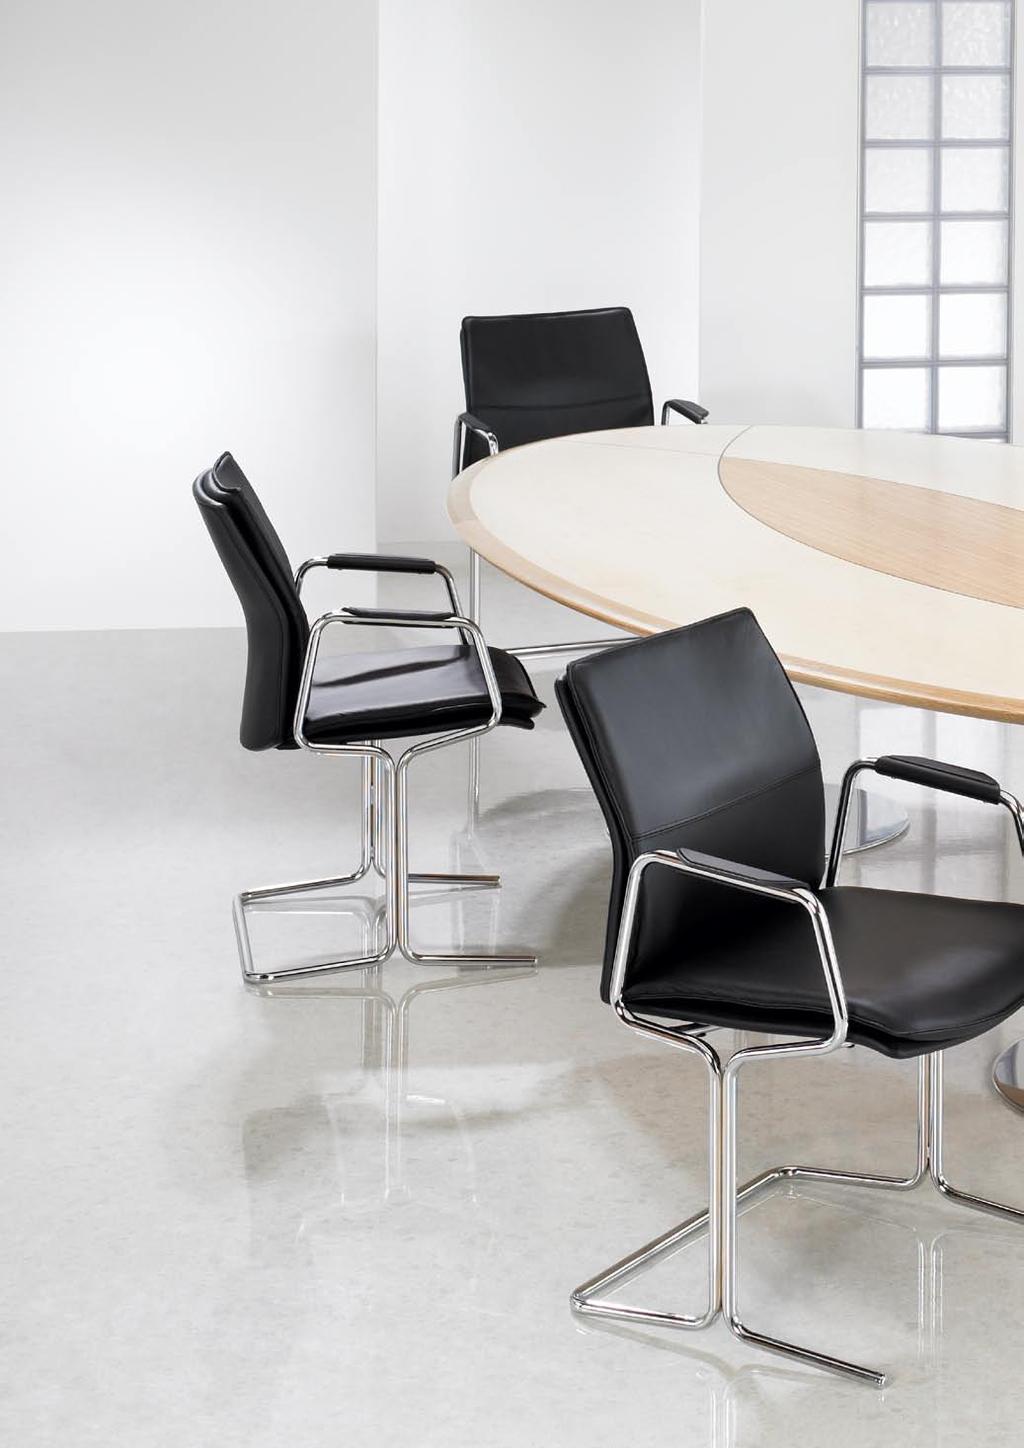 Executive AND CONFERENCE Chairs HBB The HBB series comprises executive and conference seating of the highest quality.